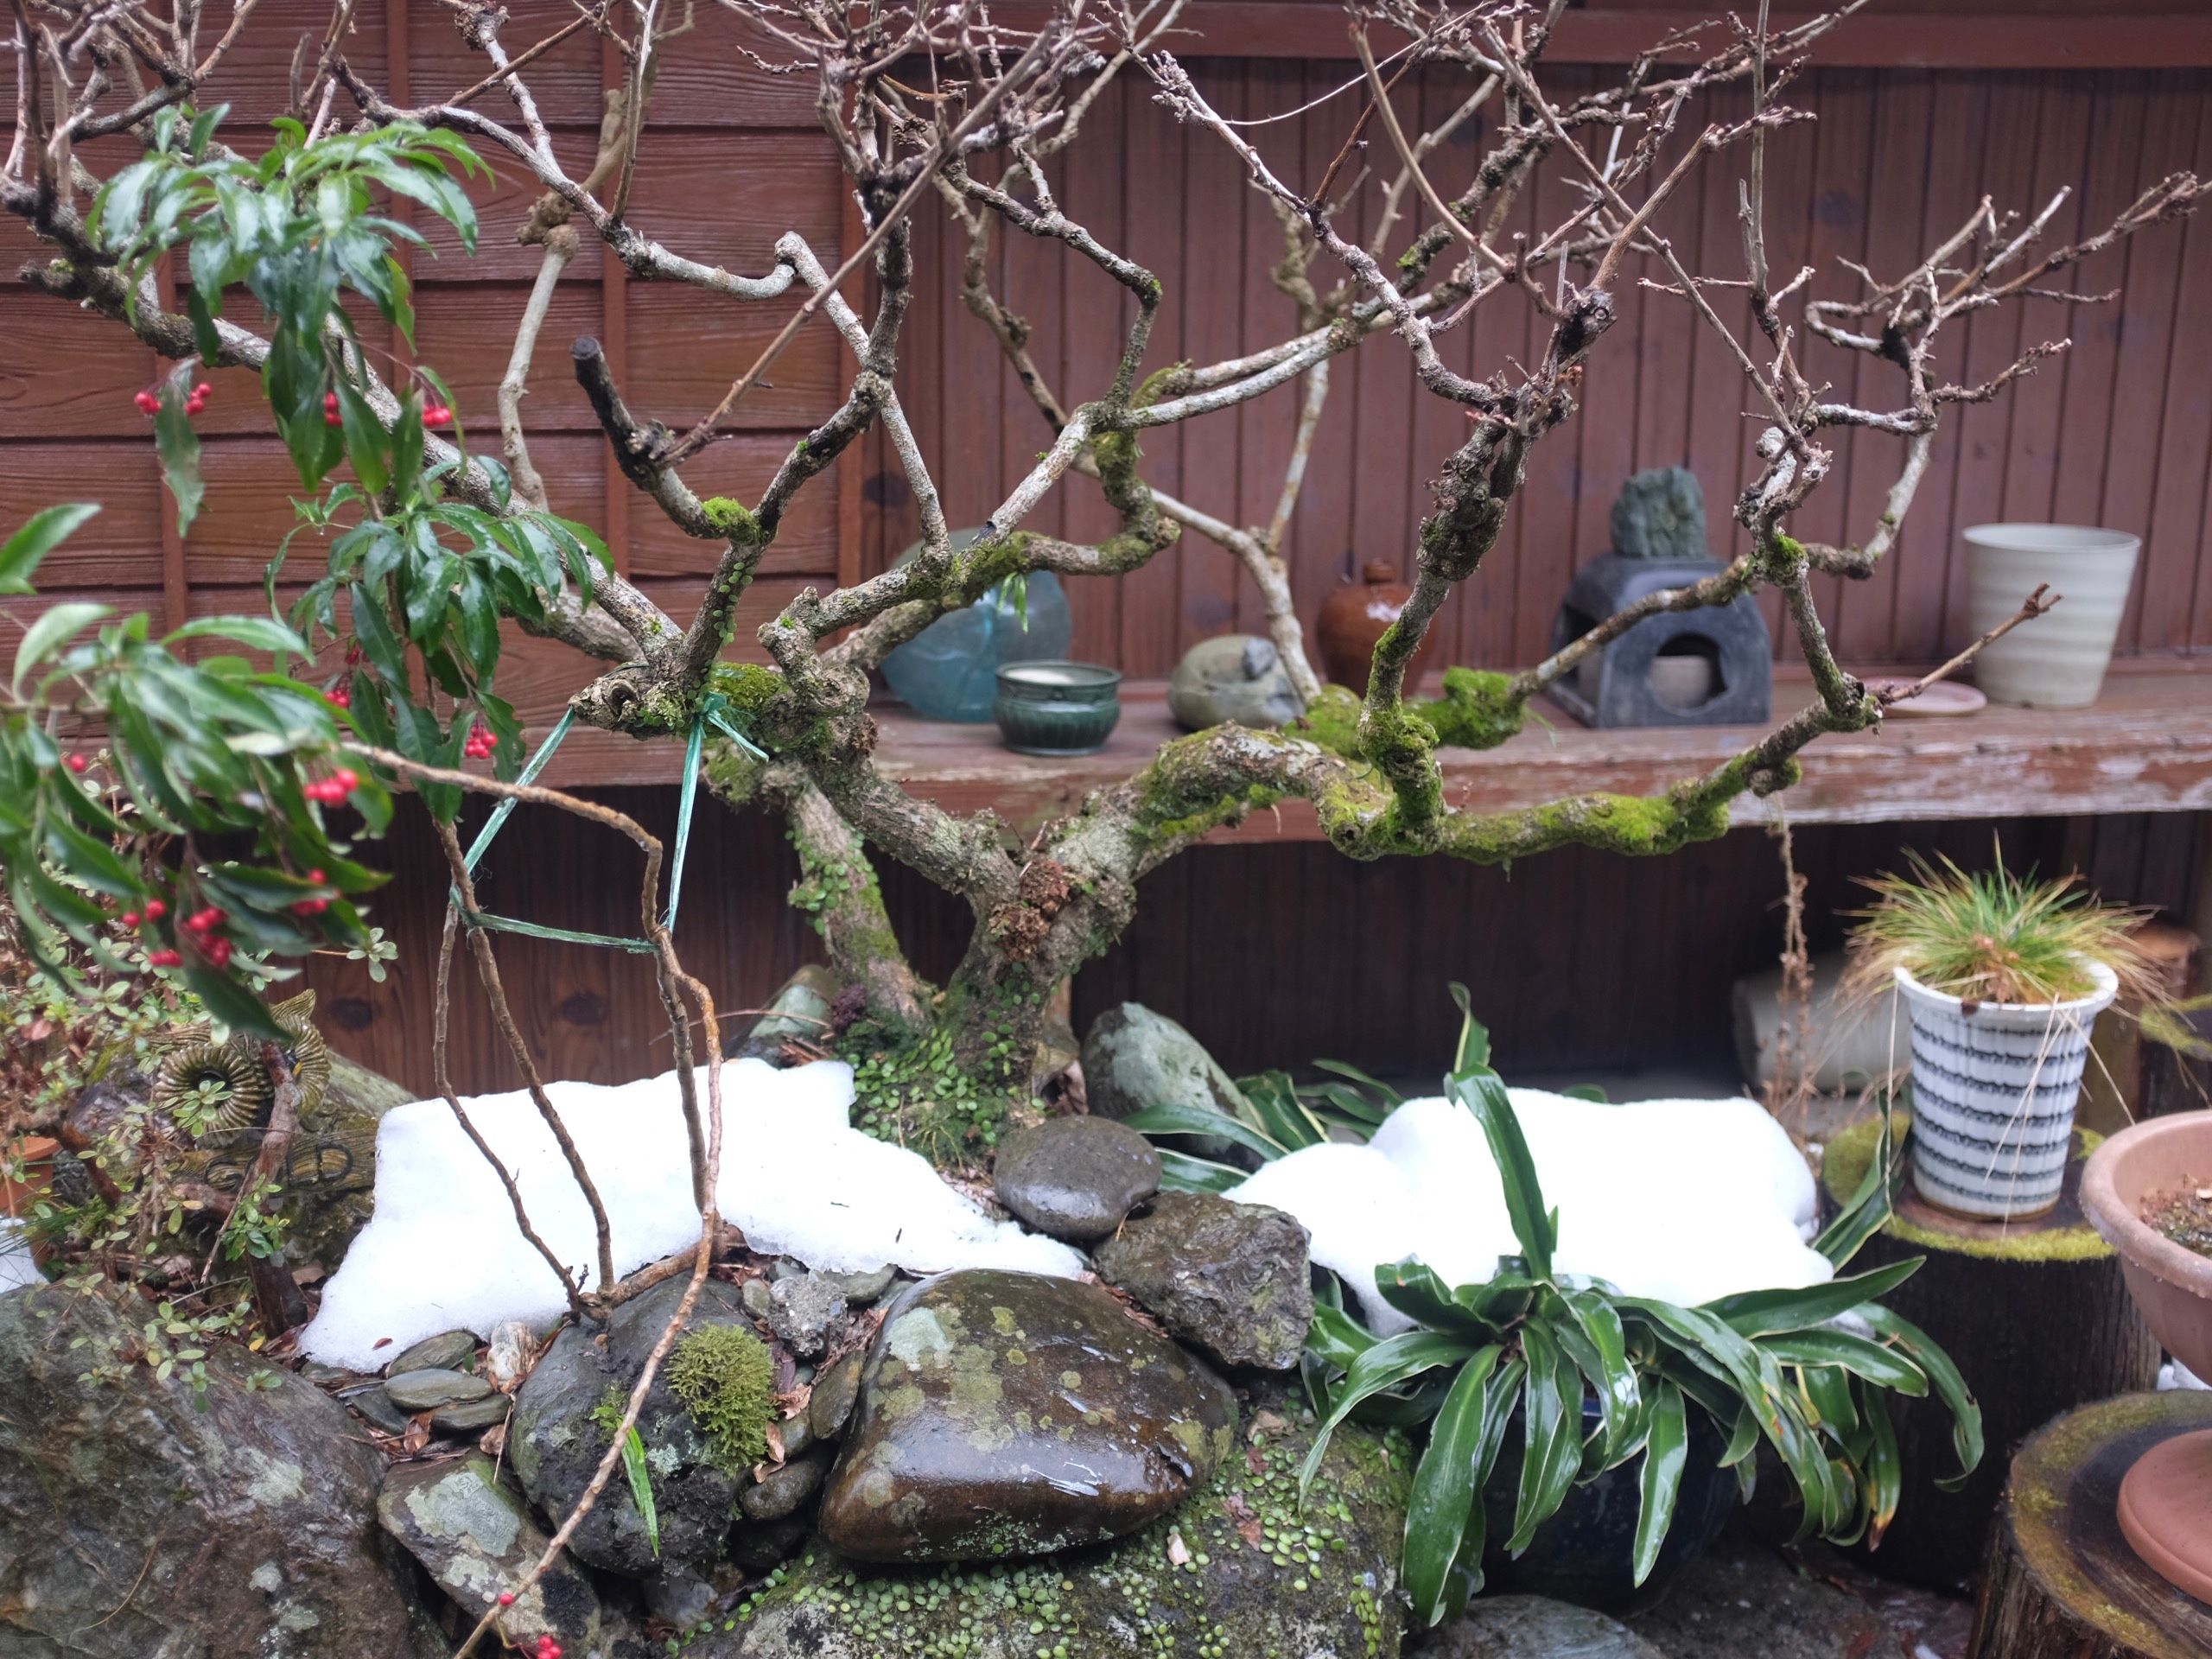 A small tree in a garden with patches of snow under it.